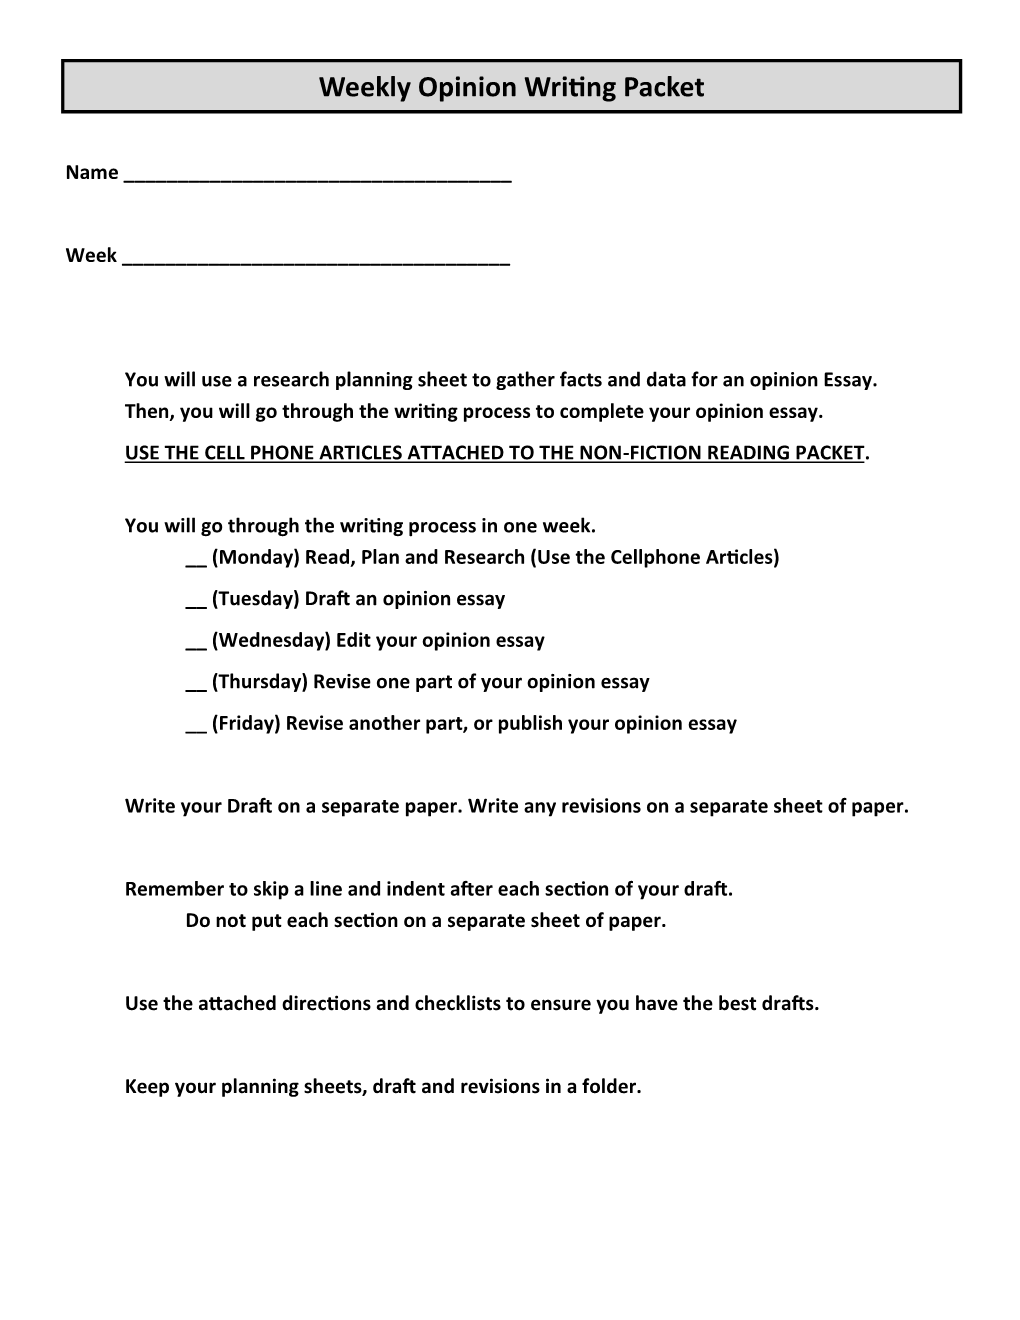 Weekly Opinion Writing Packet